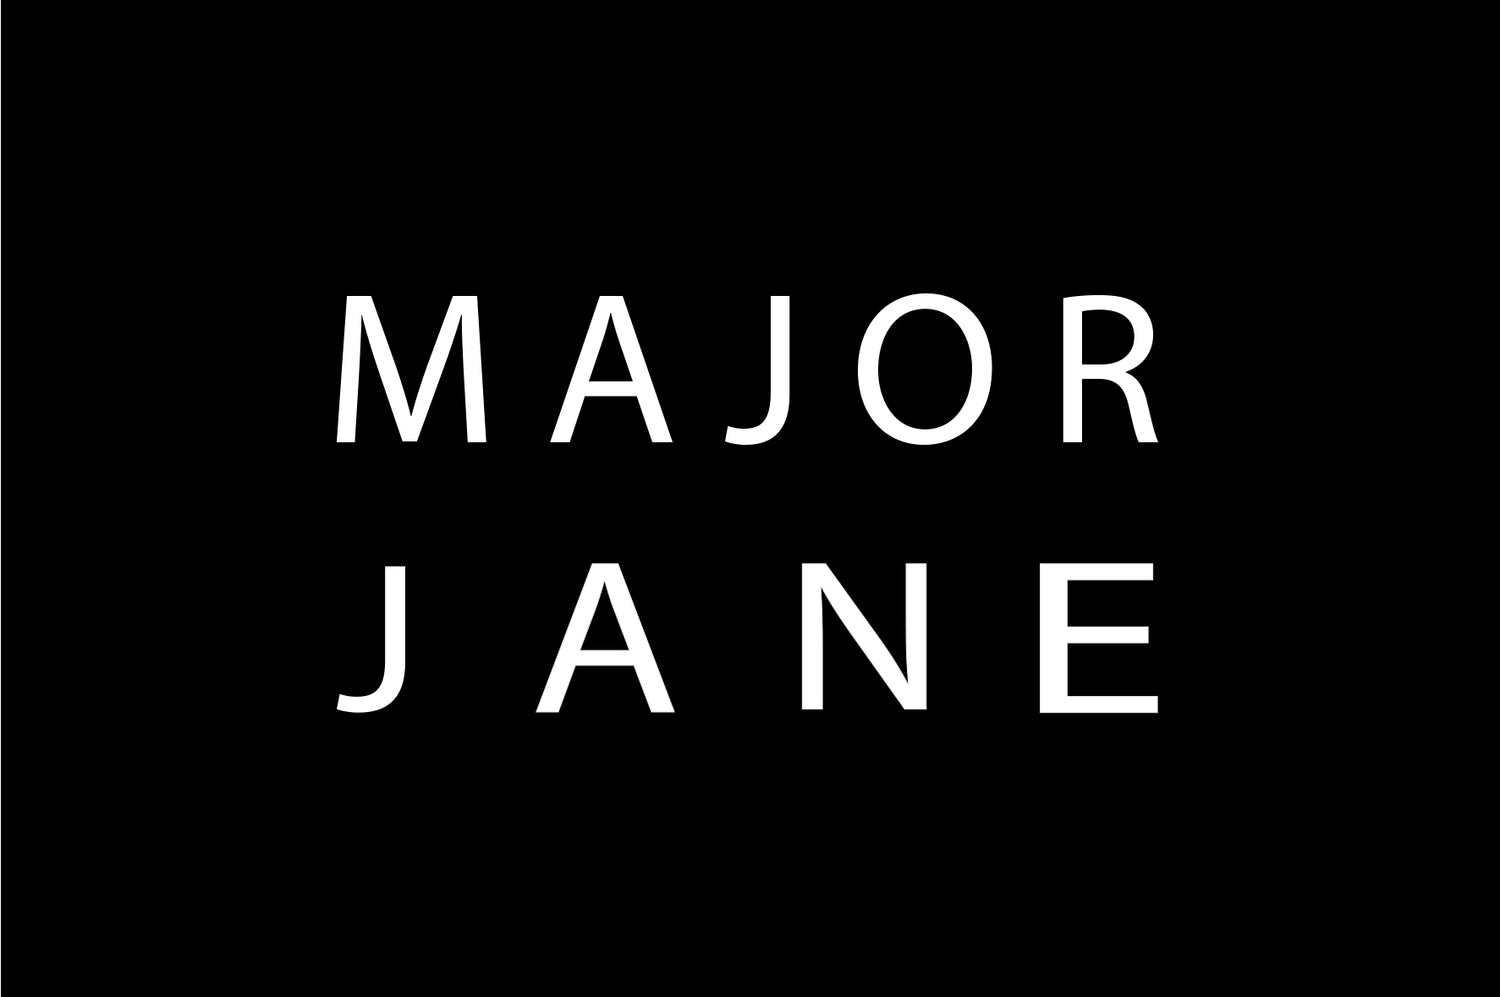 ALL MAJOR JANE PRODUCTS